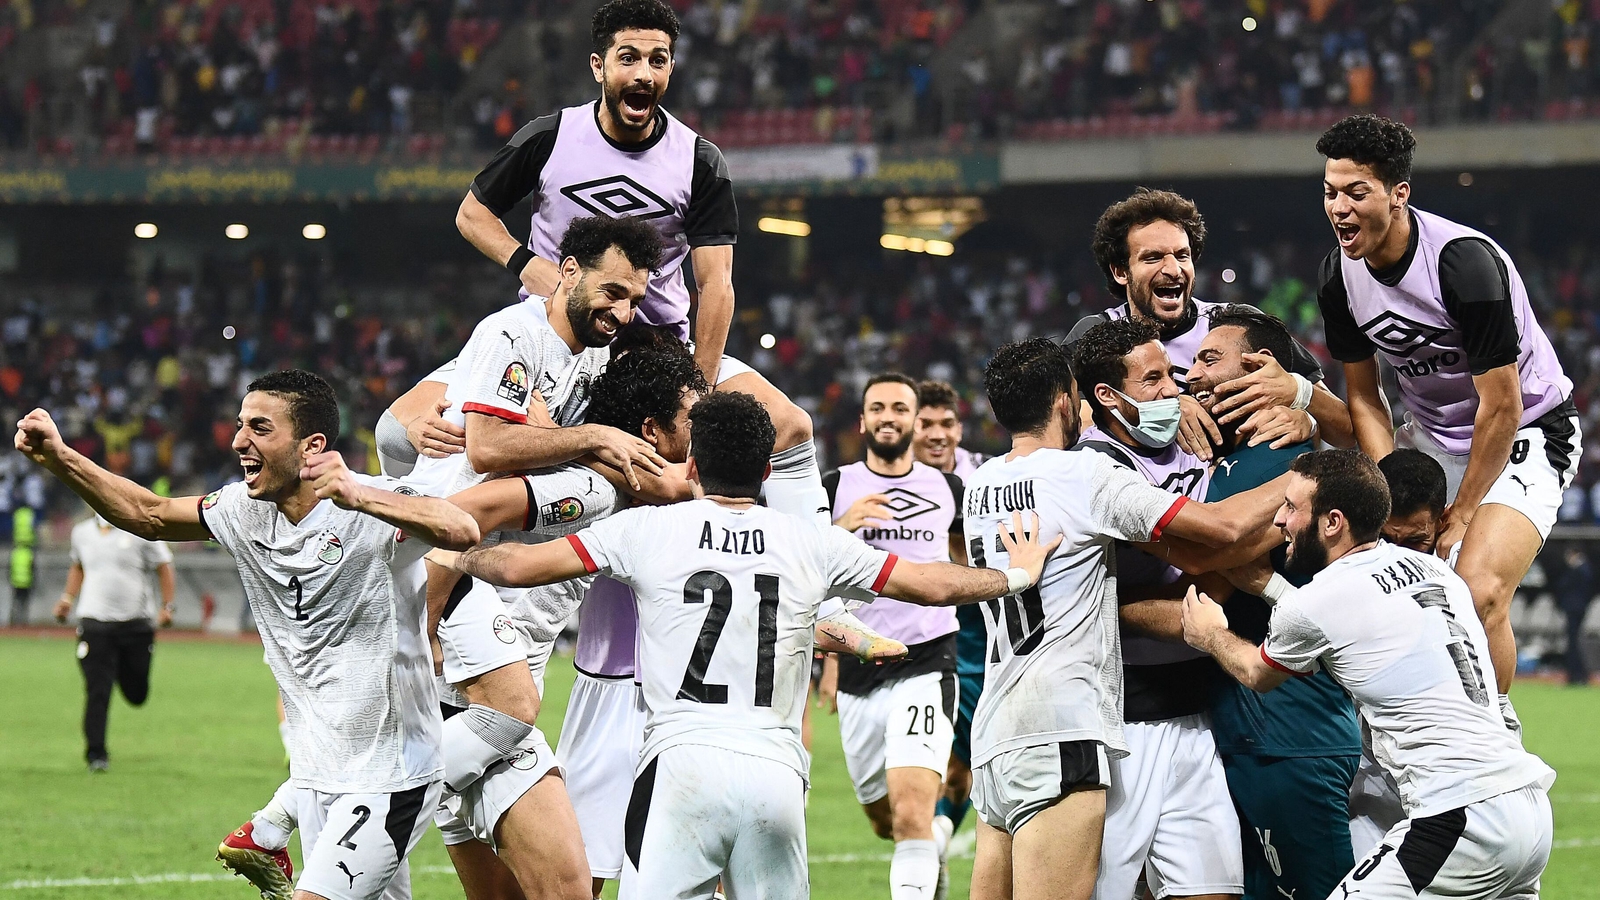 AFCON: Egypt advance on penalties against Ivory Coast